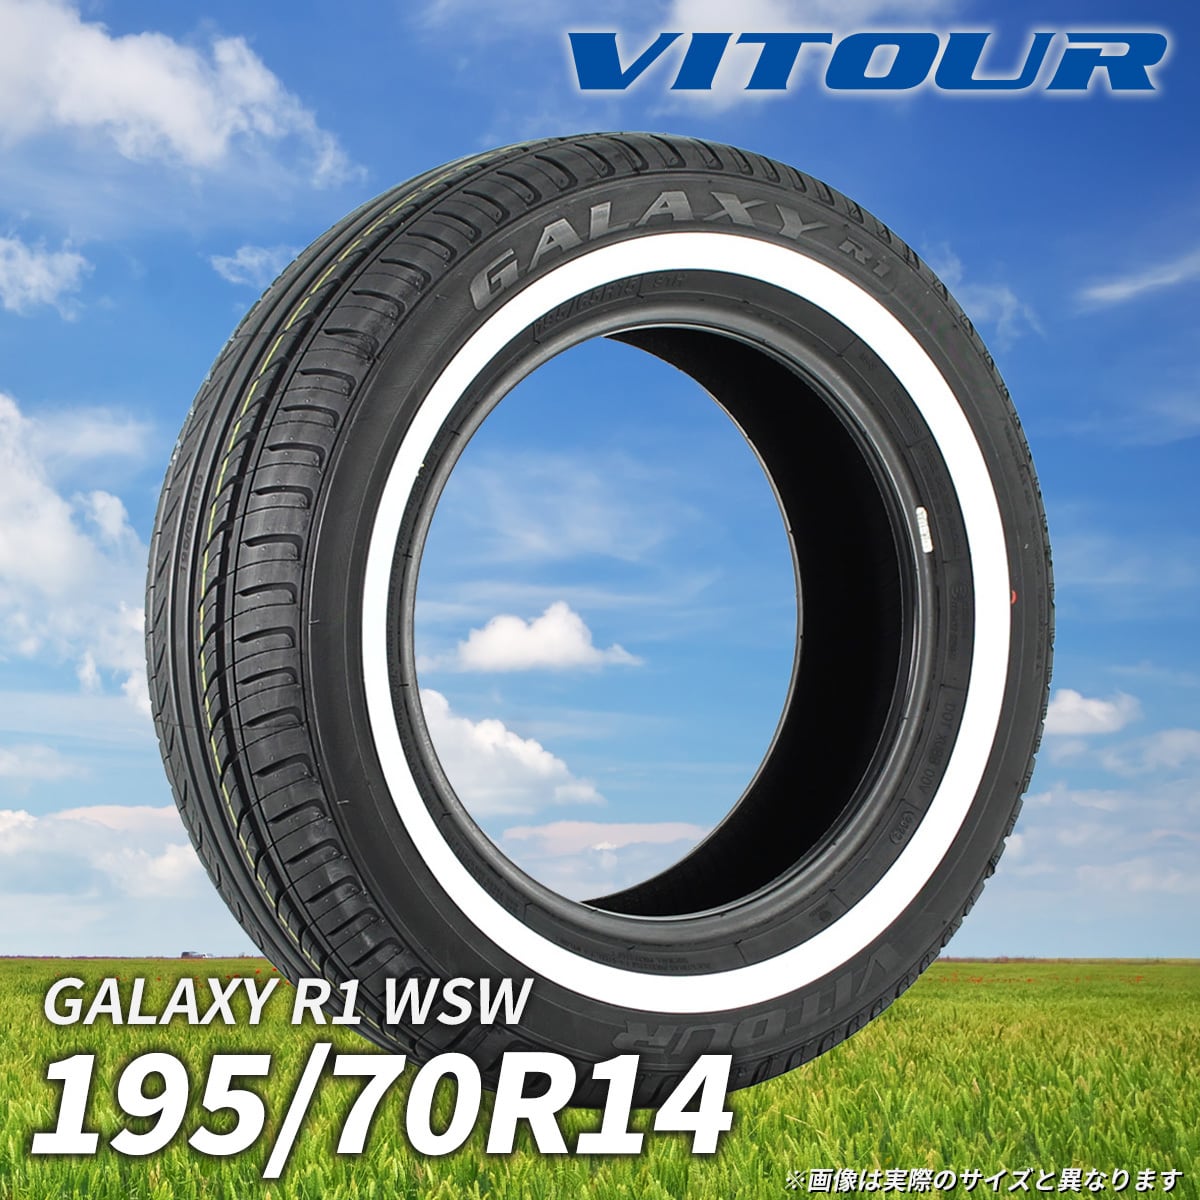 195/70R14 GALAXY R1 WSW【送料無料】 | VITOUR TIRE OFFICIAL STORE